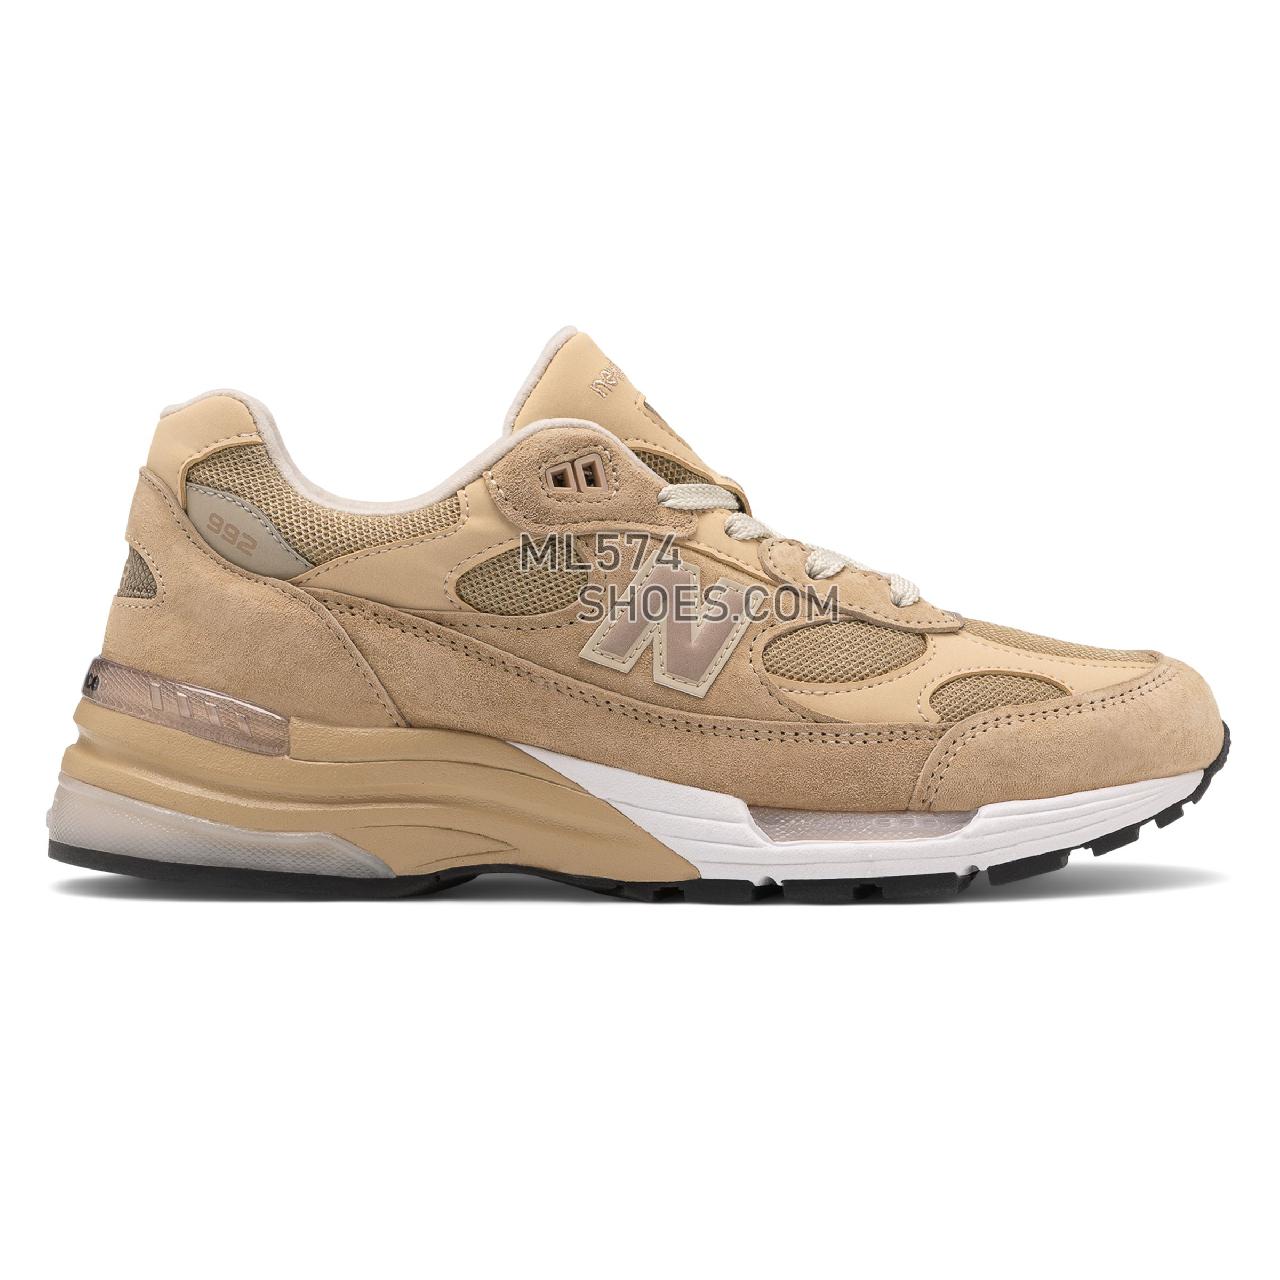 New Balance Made in US 992 - Men's Made in US 992 Classic - Tan with White - M992TN